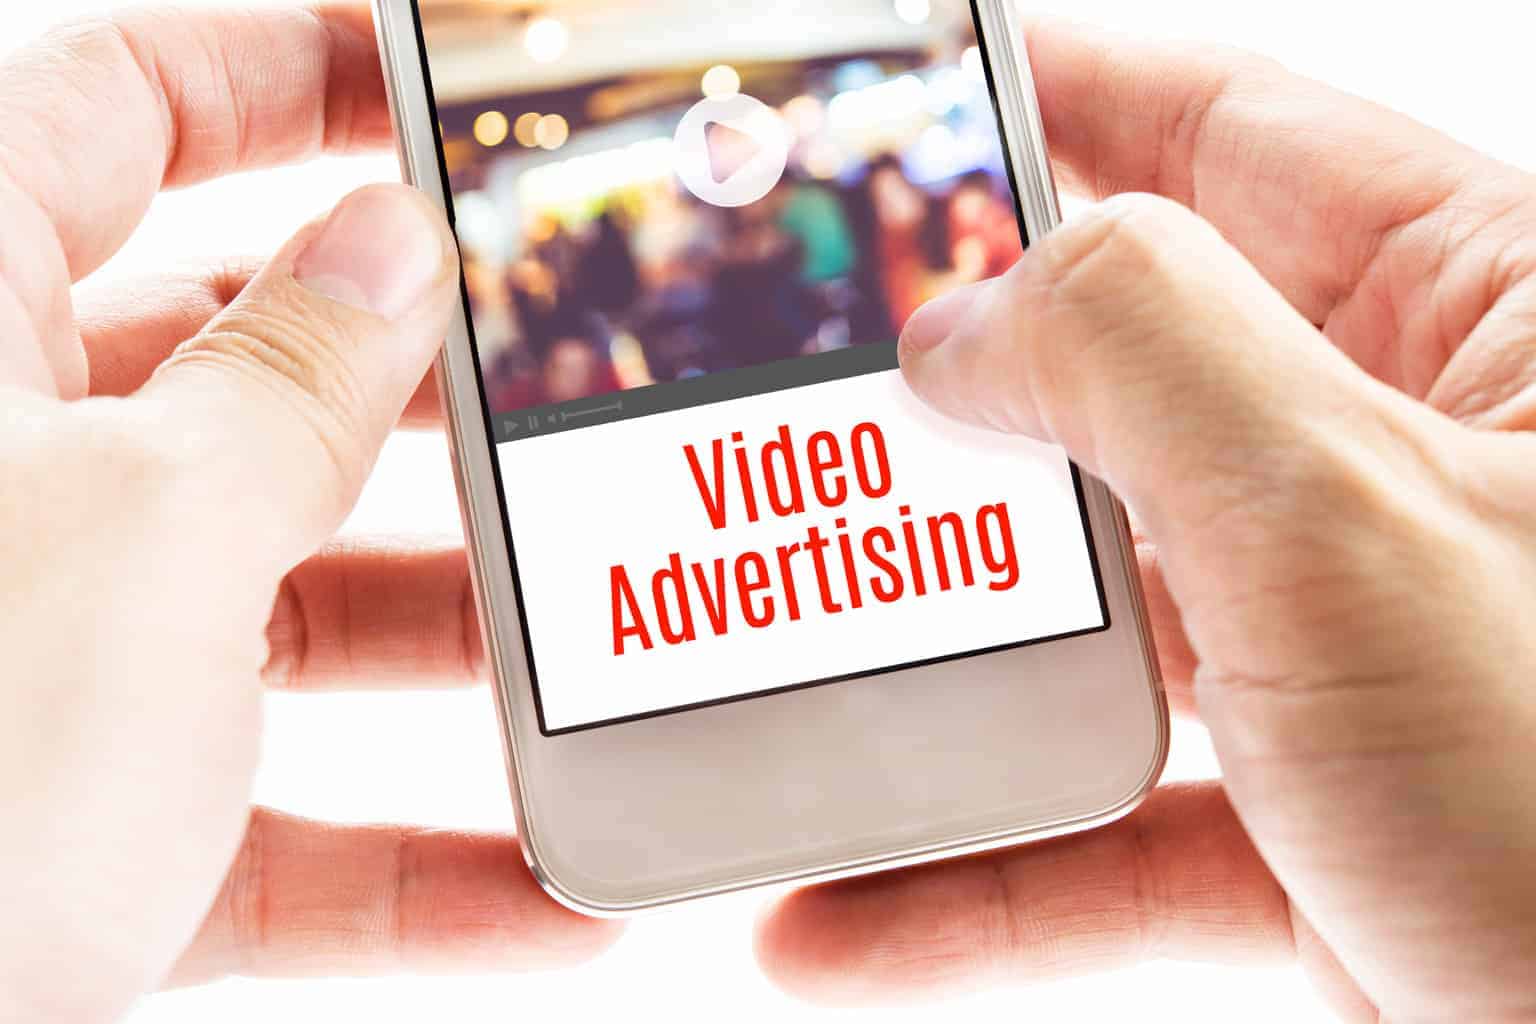 Text Vs. Video: Why Humans Prefer Video Advertising